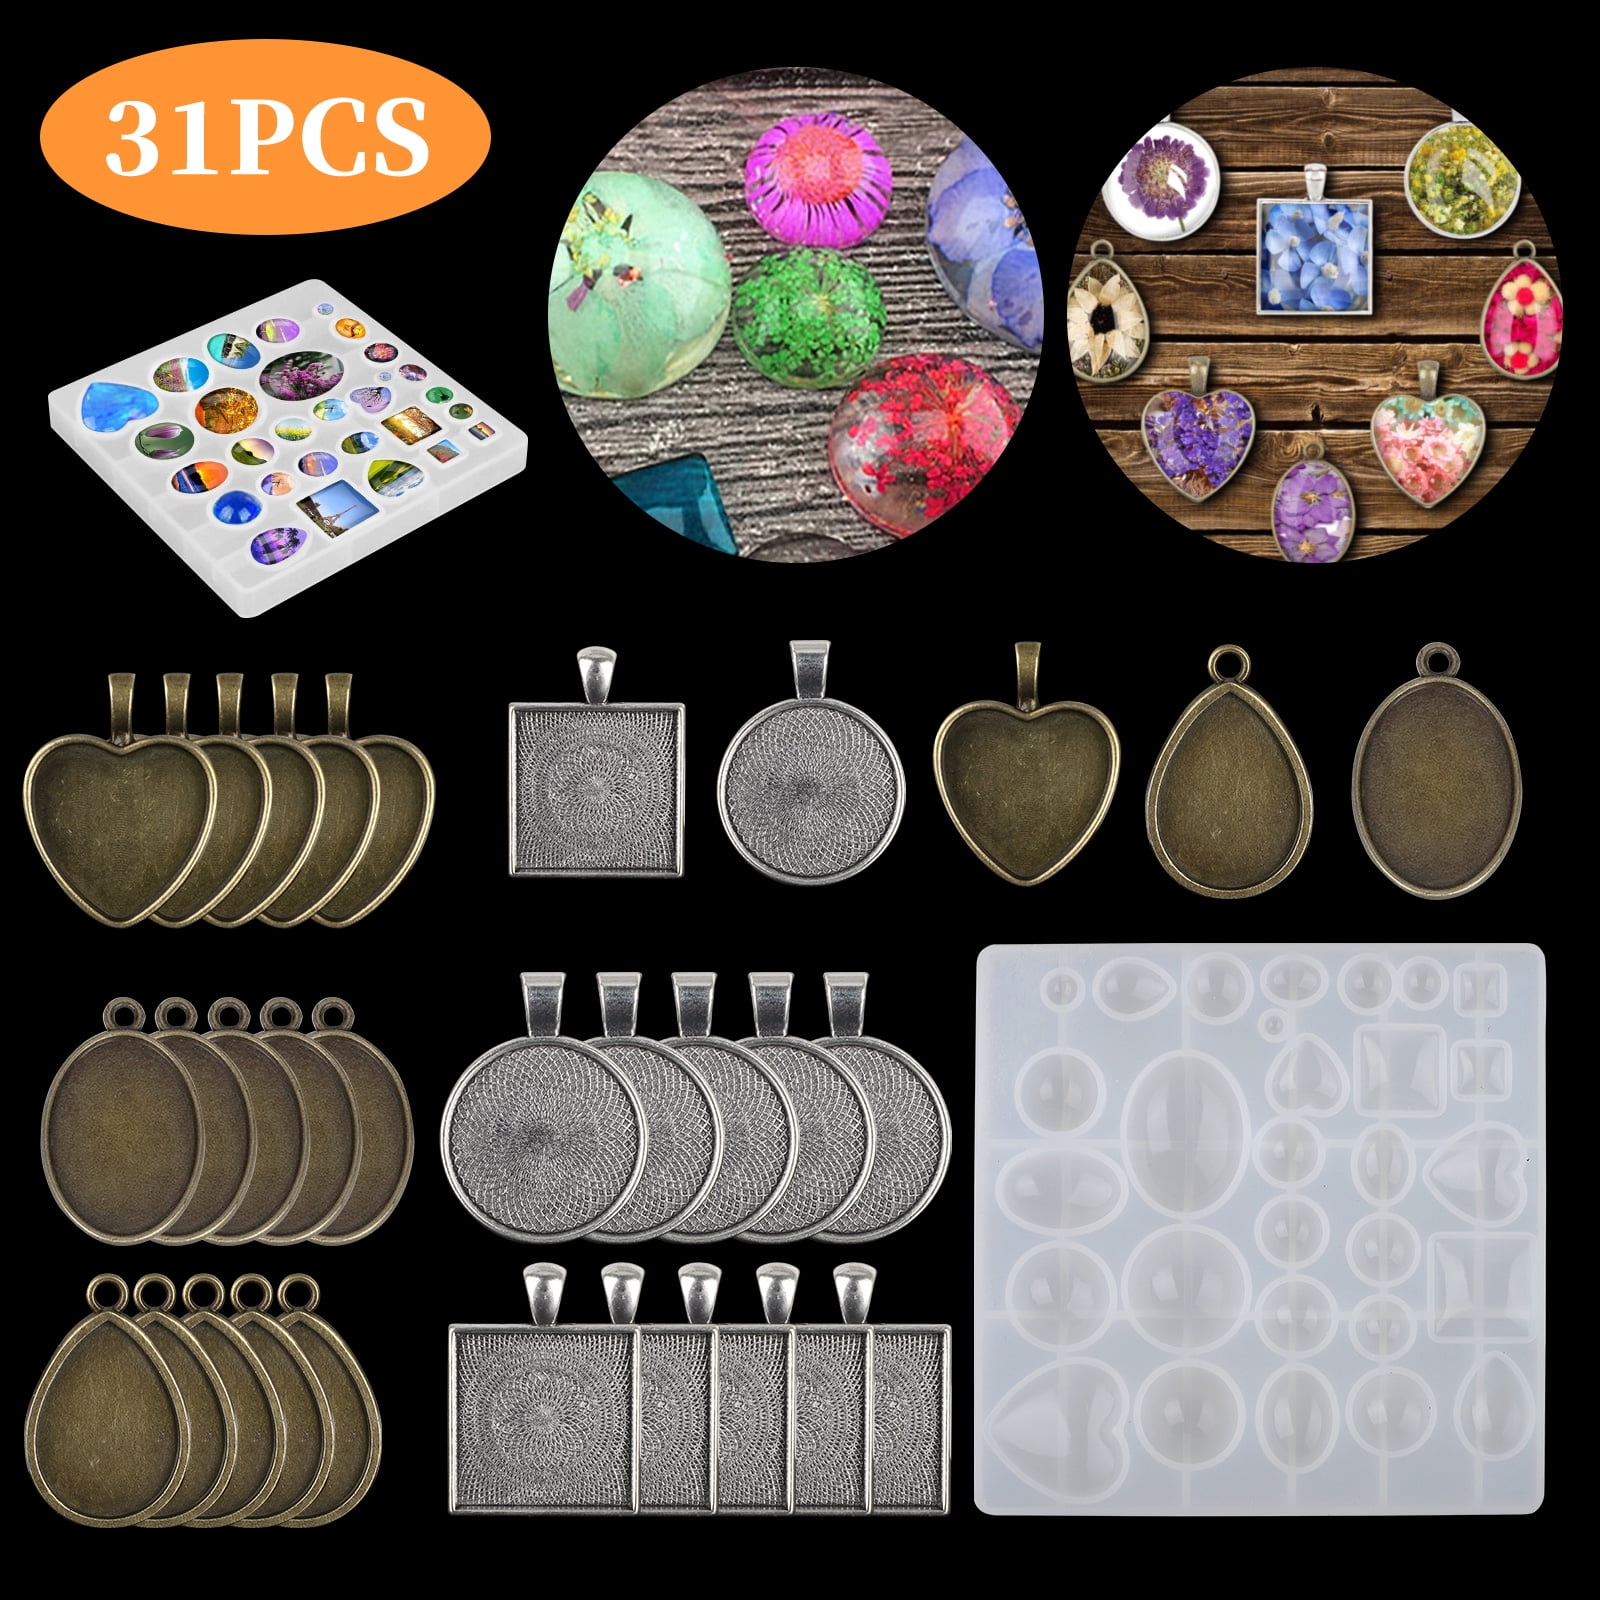  FineInno Sphere Resin Mold, 20 Beads Silicone Mold, Crystal  Ball Epoxy Casting Mold, Jewelry Making Mold for DIY Pendant Necklace  Earring Bracelet Ring : Arts, Crafts & Sewing